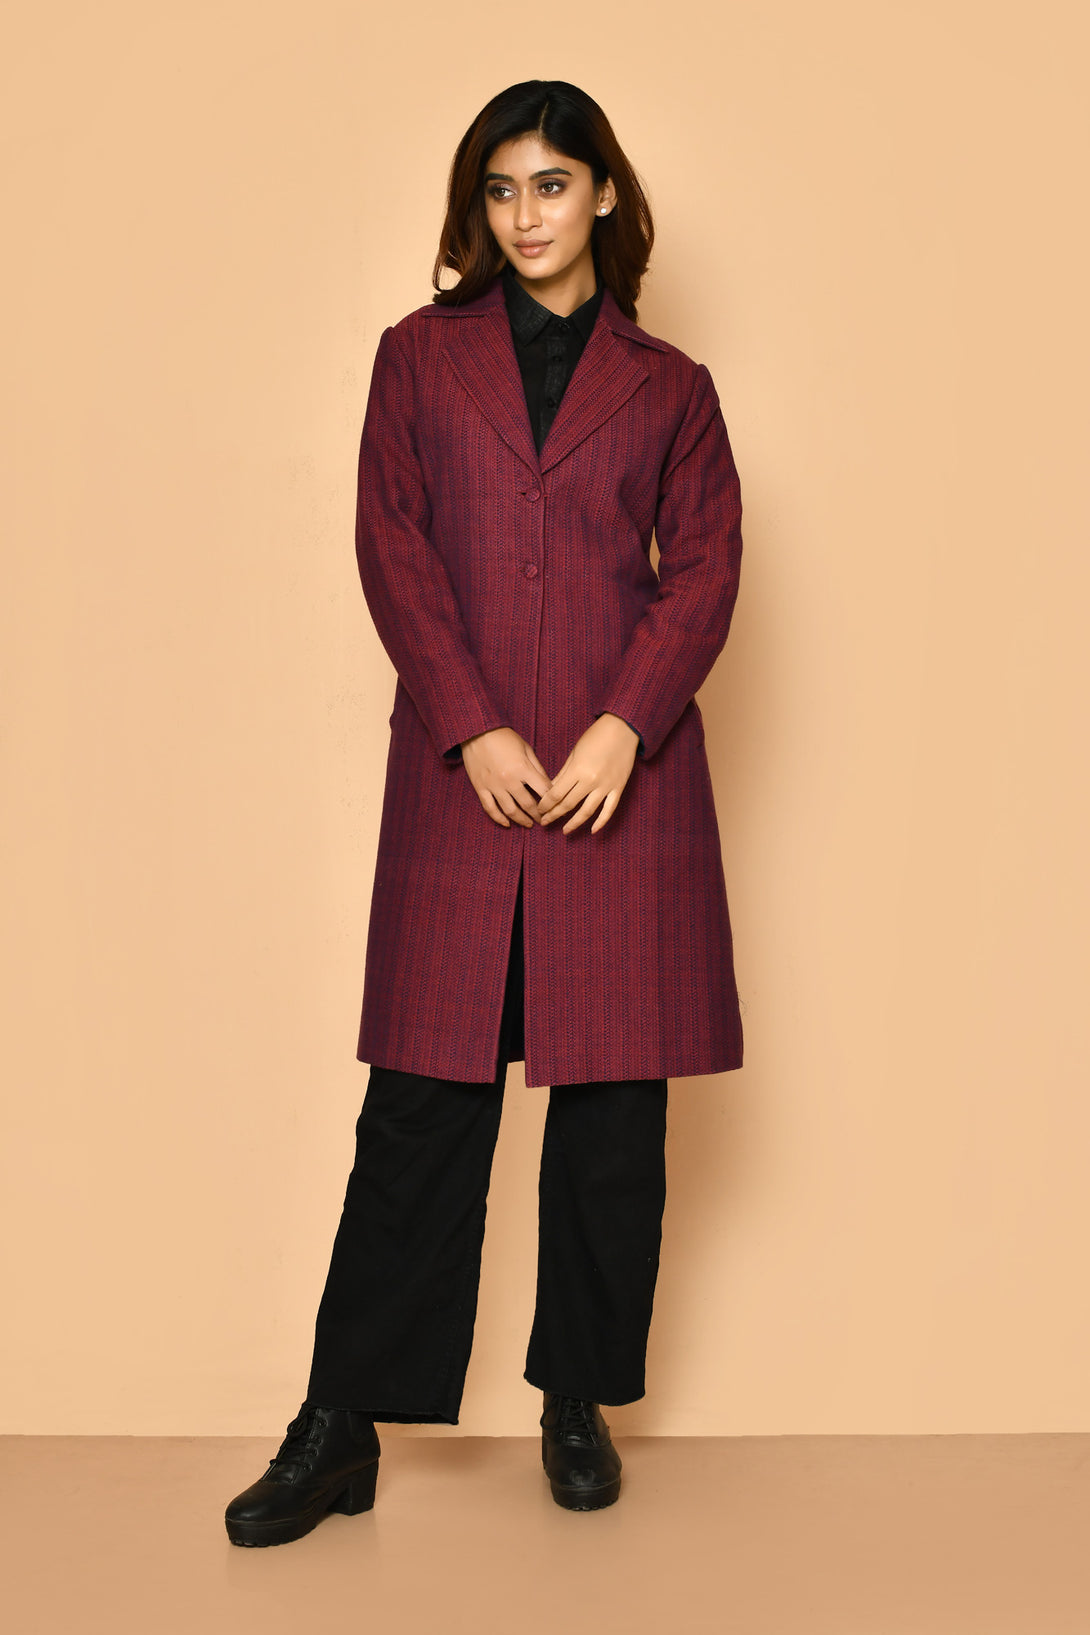 Add this handloom cotton long jacket to your work wear wardrobe